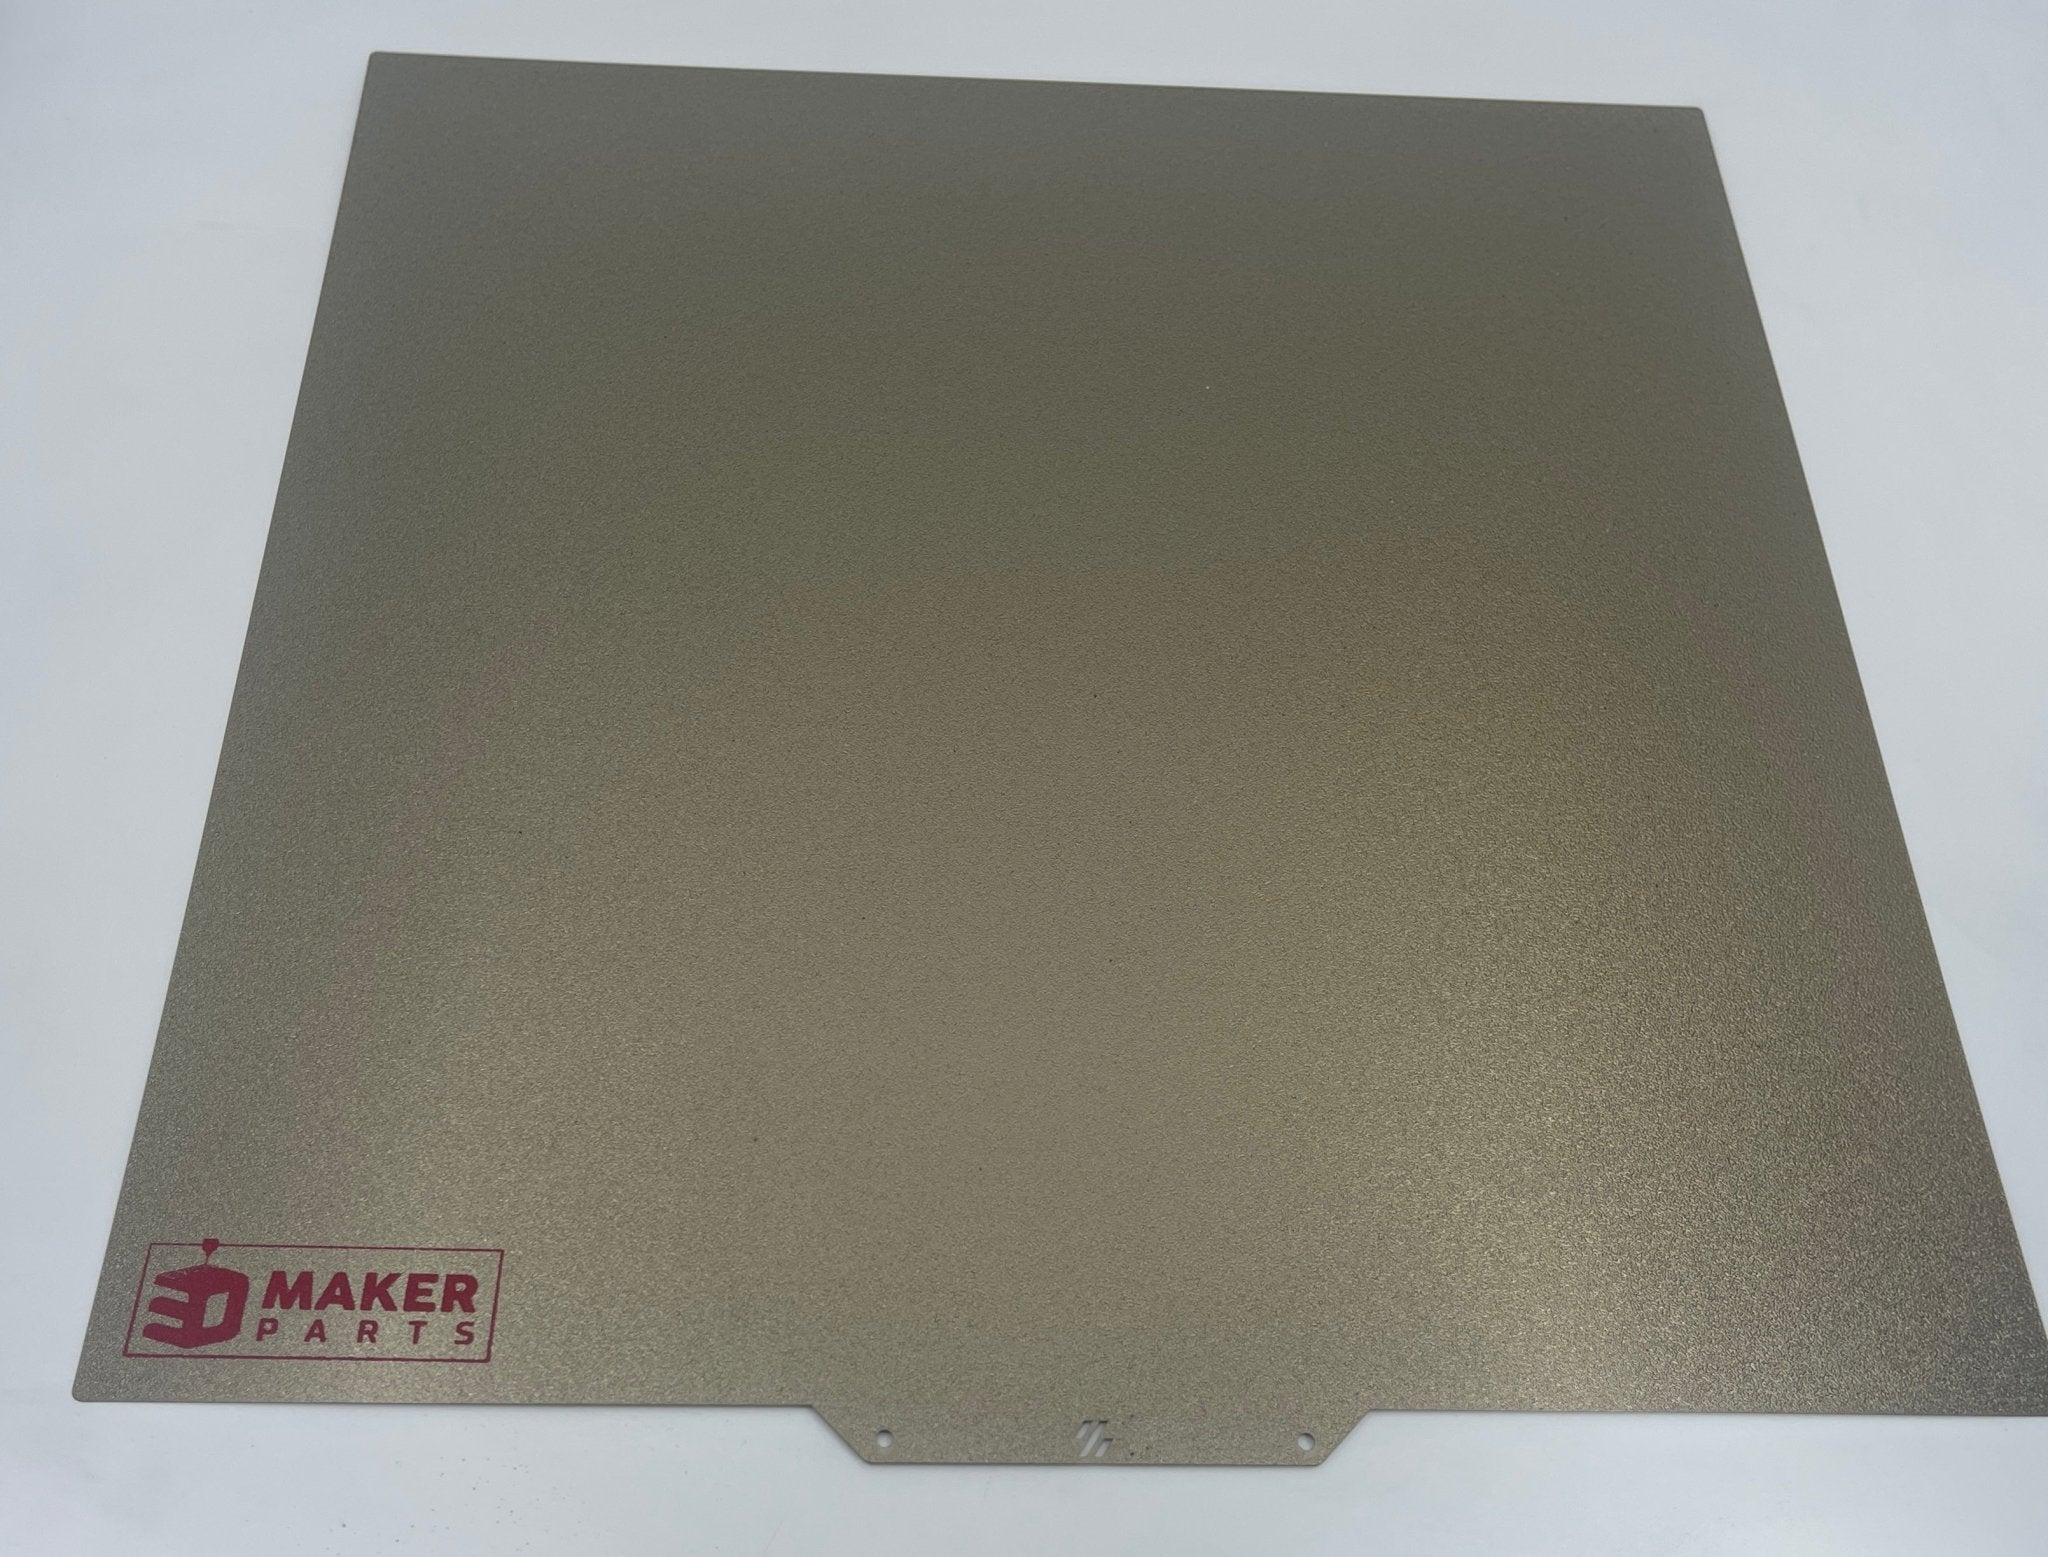 3DMP Single-Sided PEI Flex Plate (Smooth and Texture) - West3D Printing - 3DMakerParts